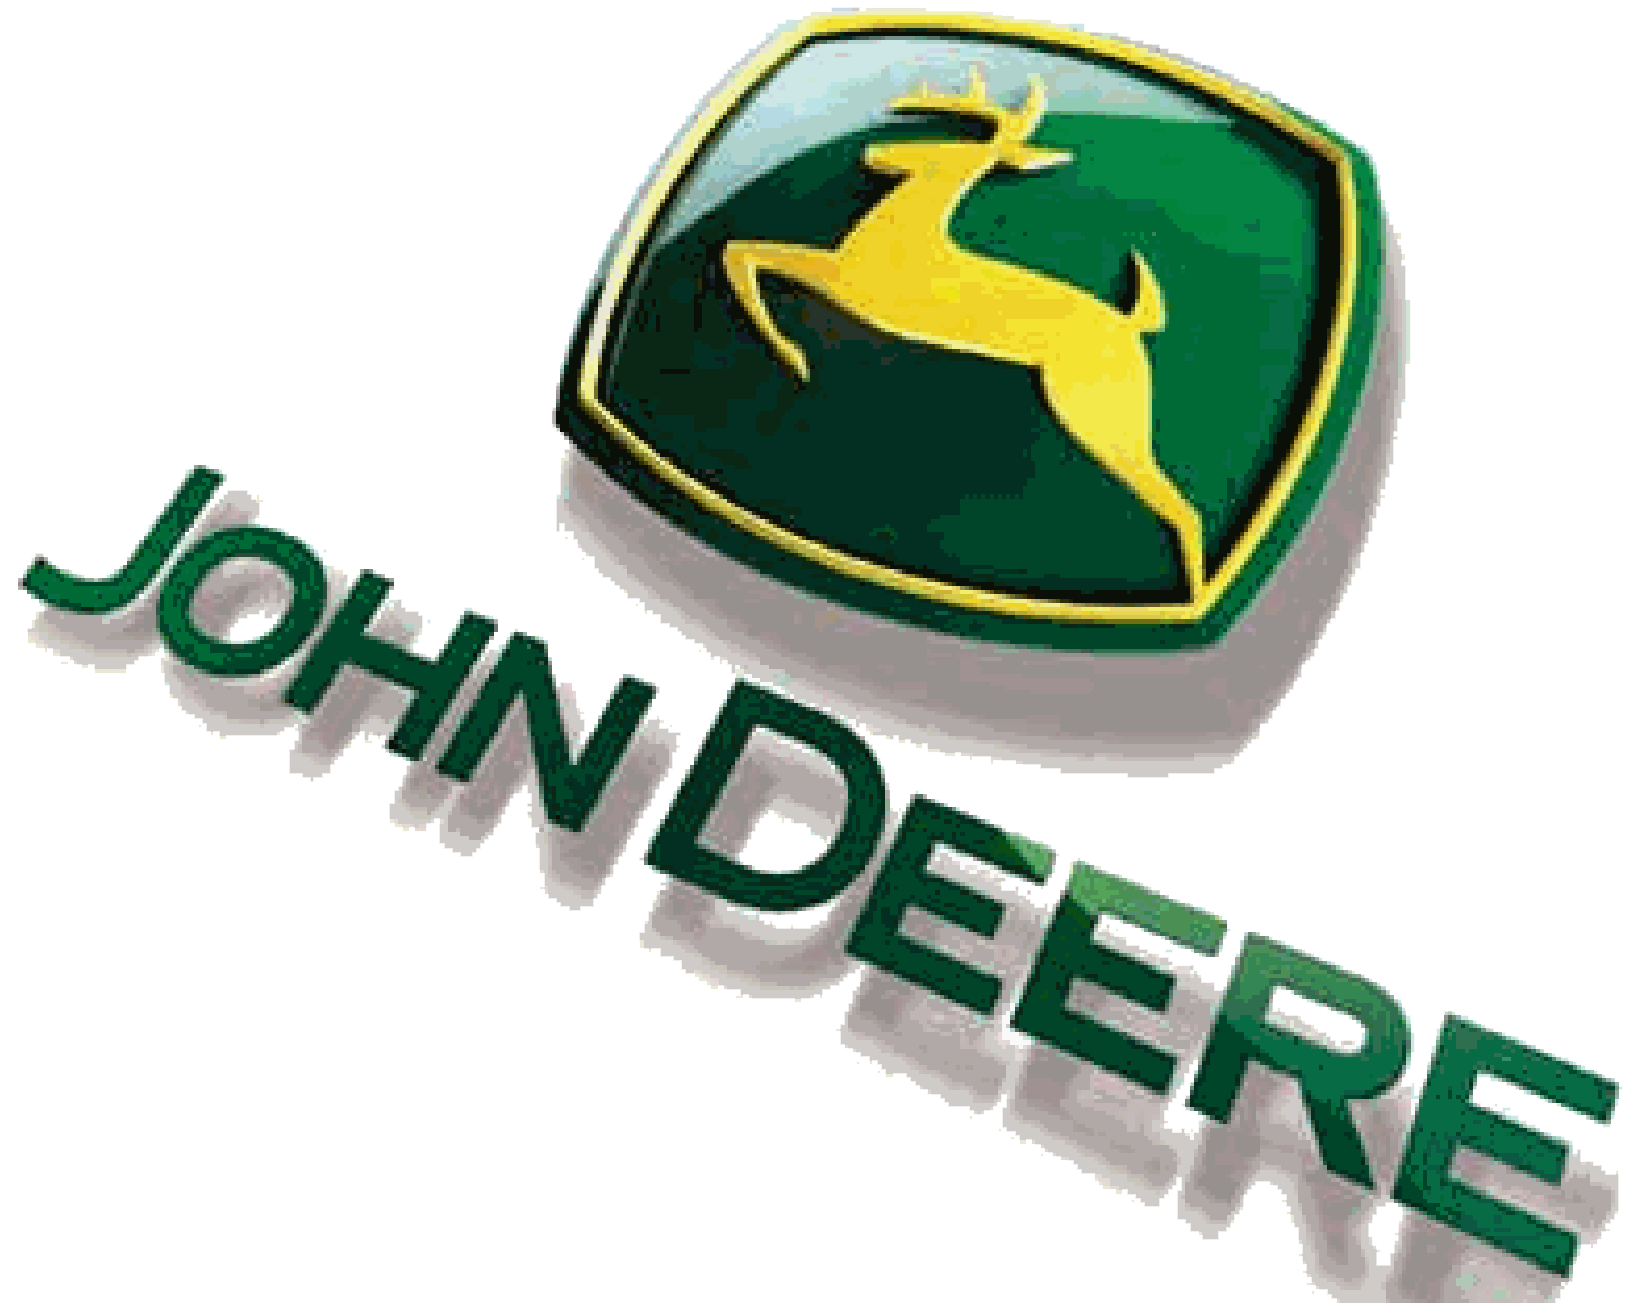 John Deere 5205 Tractor Full Review – Price, Mileage & Performance